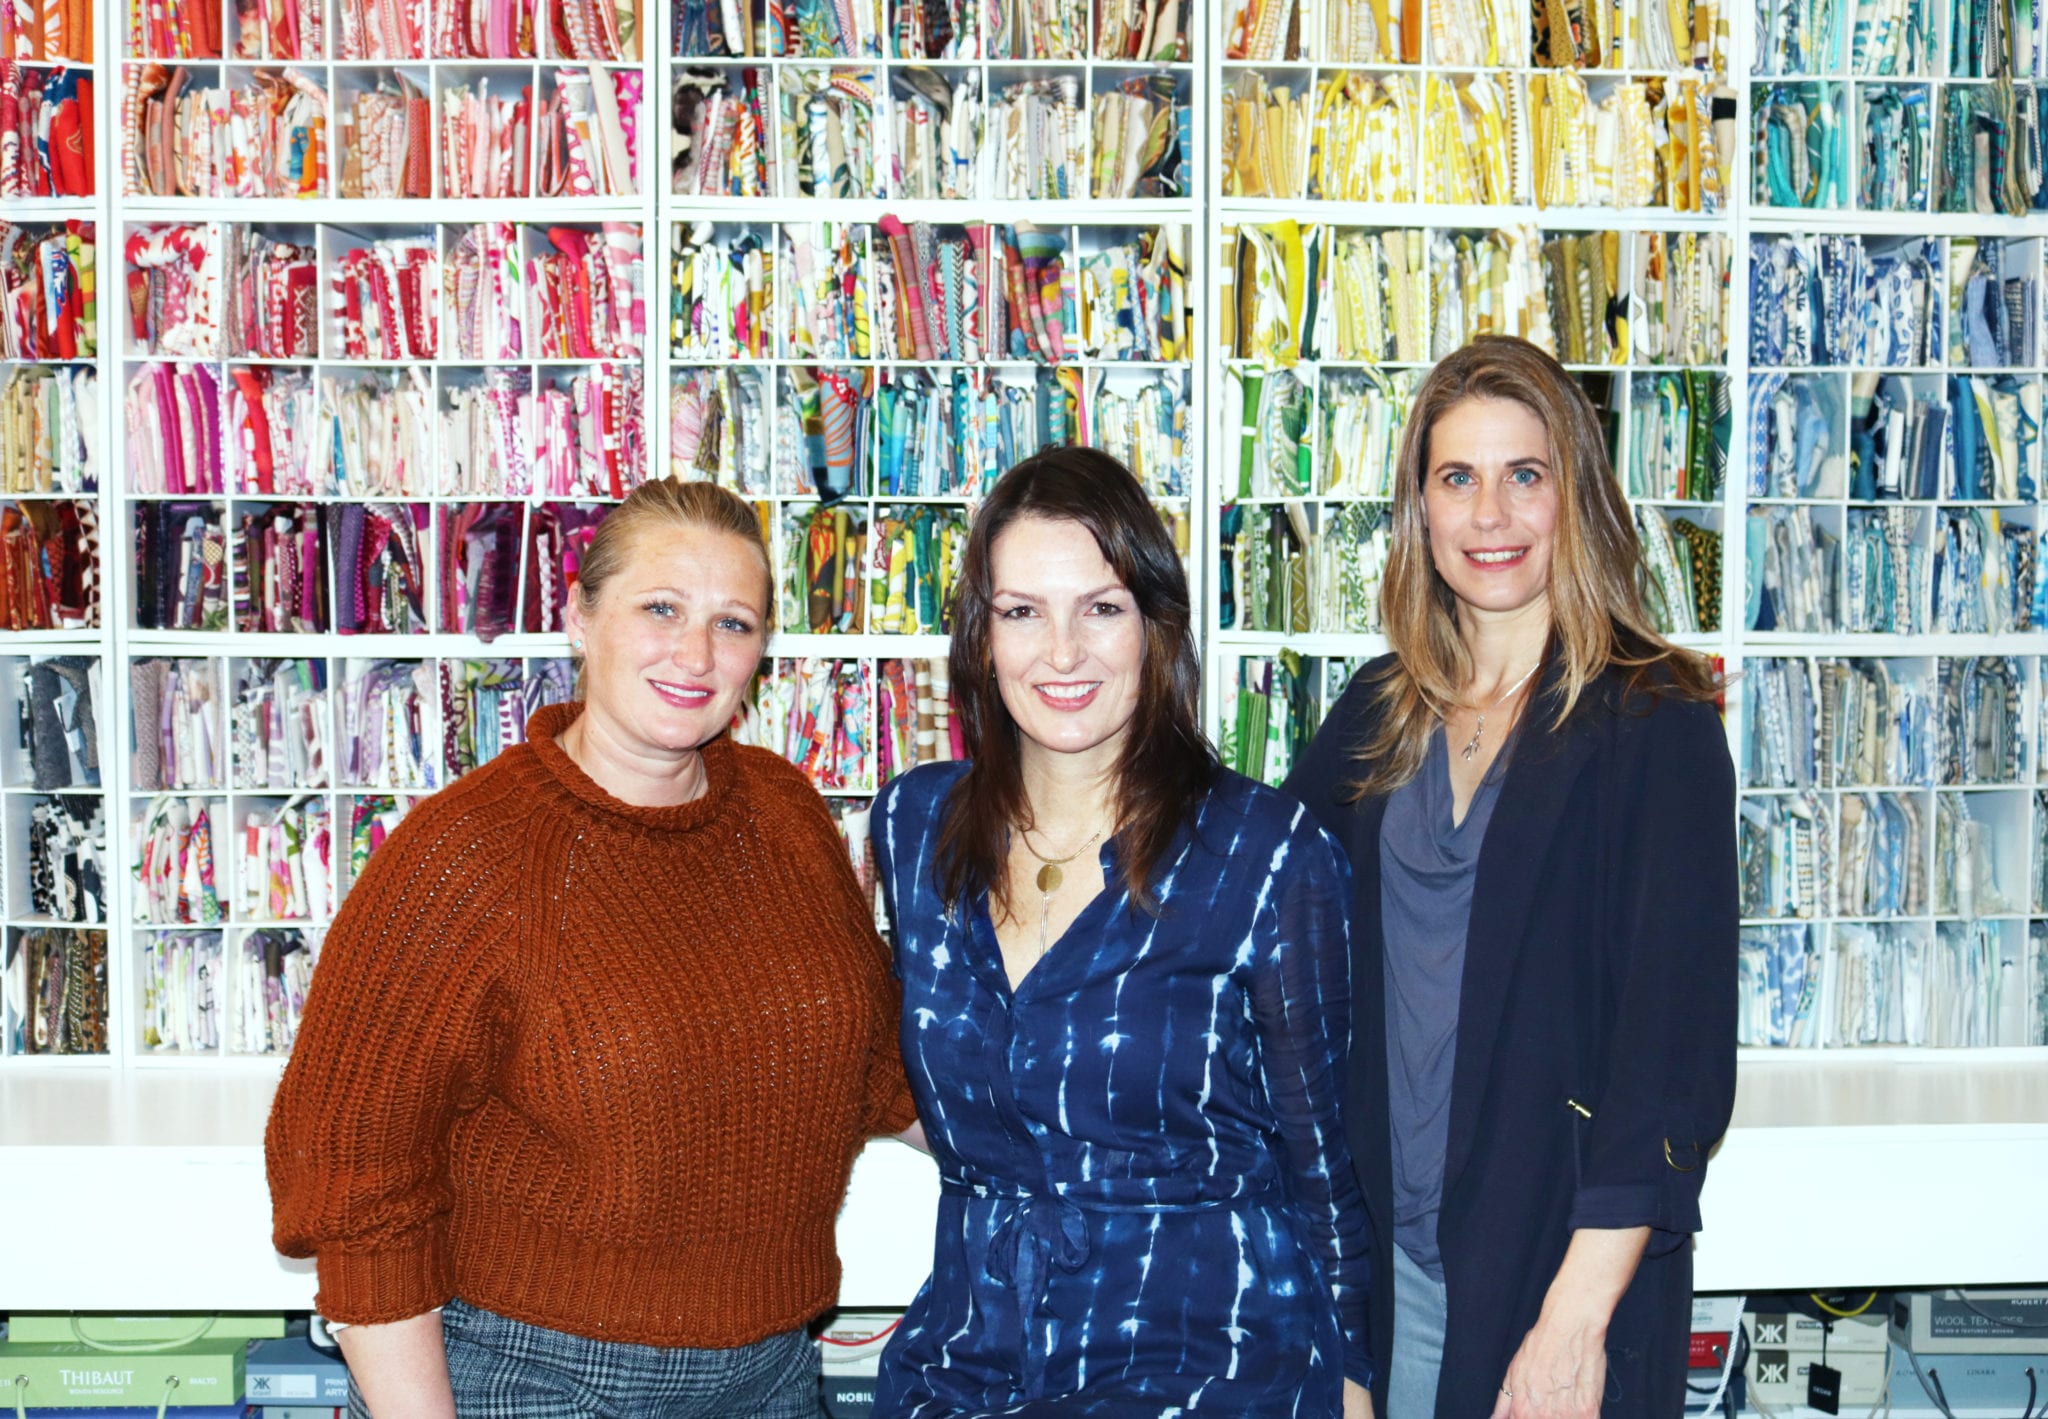 Heather French, Amy Flurry and Franziska Neumann posing for photo with rainbow colored fabric samples in shelves in background